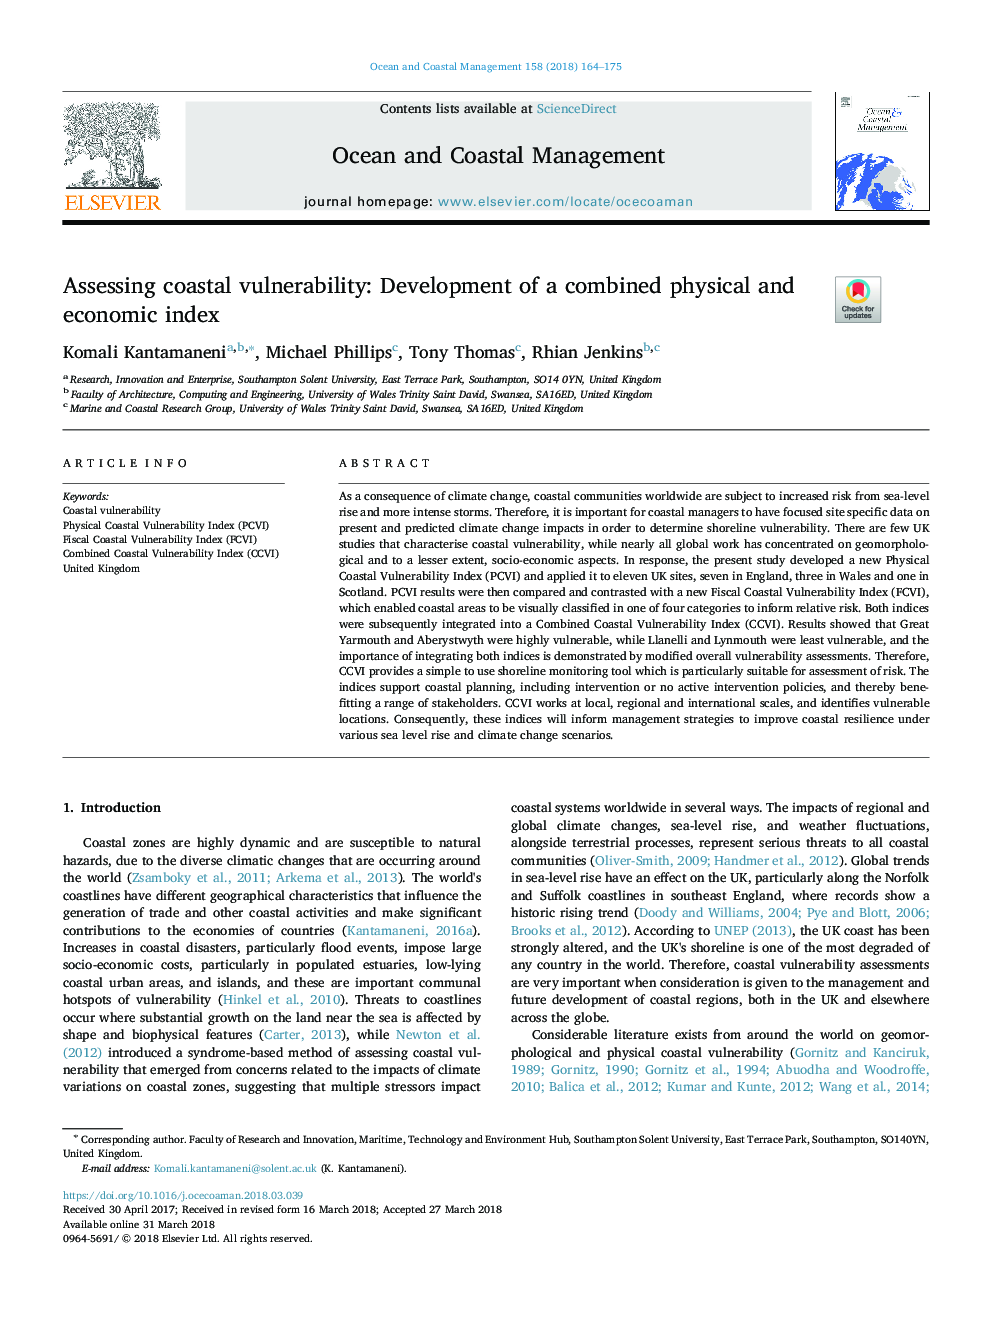 Assessing coastal vulnerability: Development of a combined physical and economic index